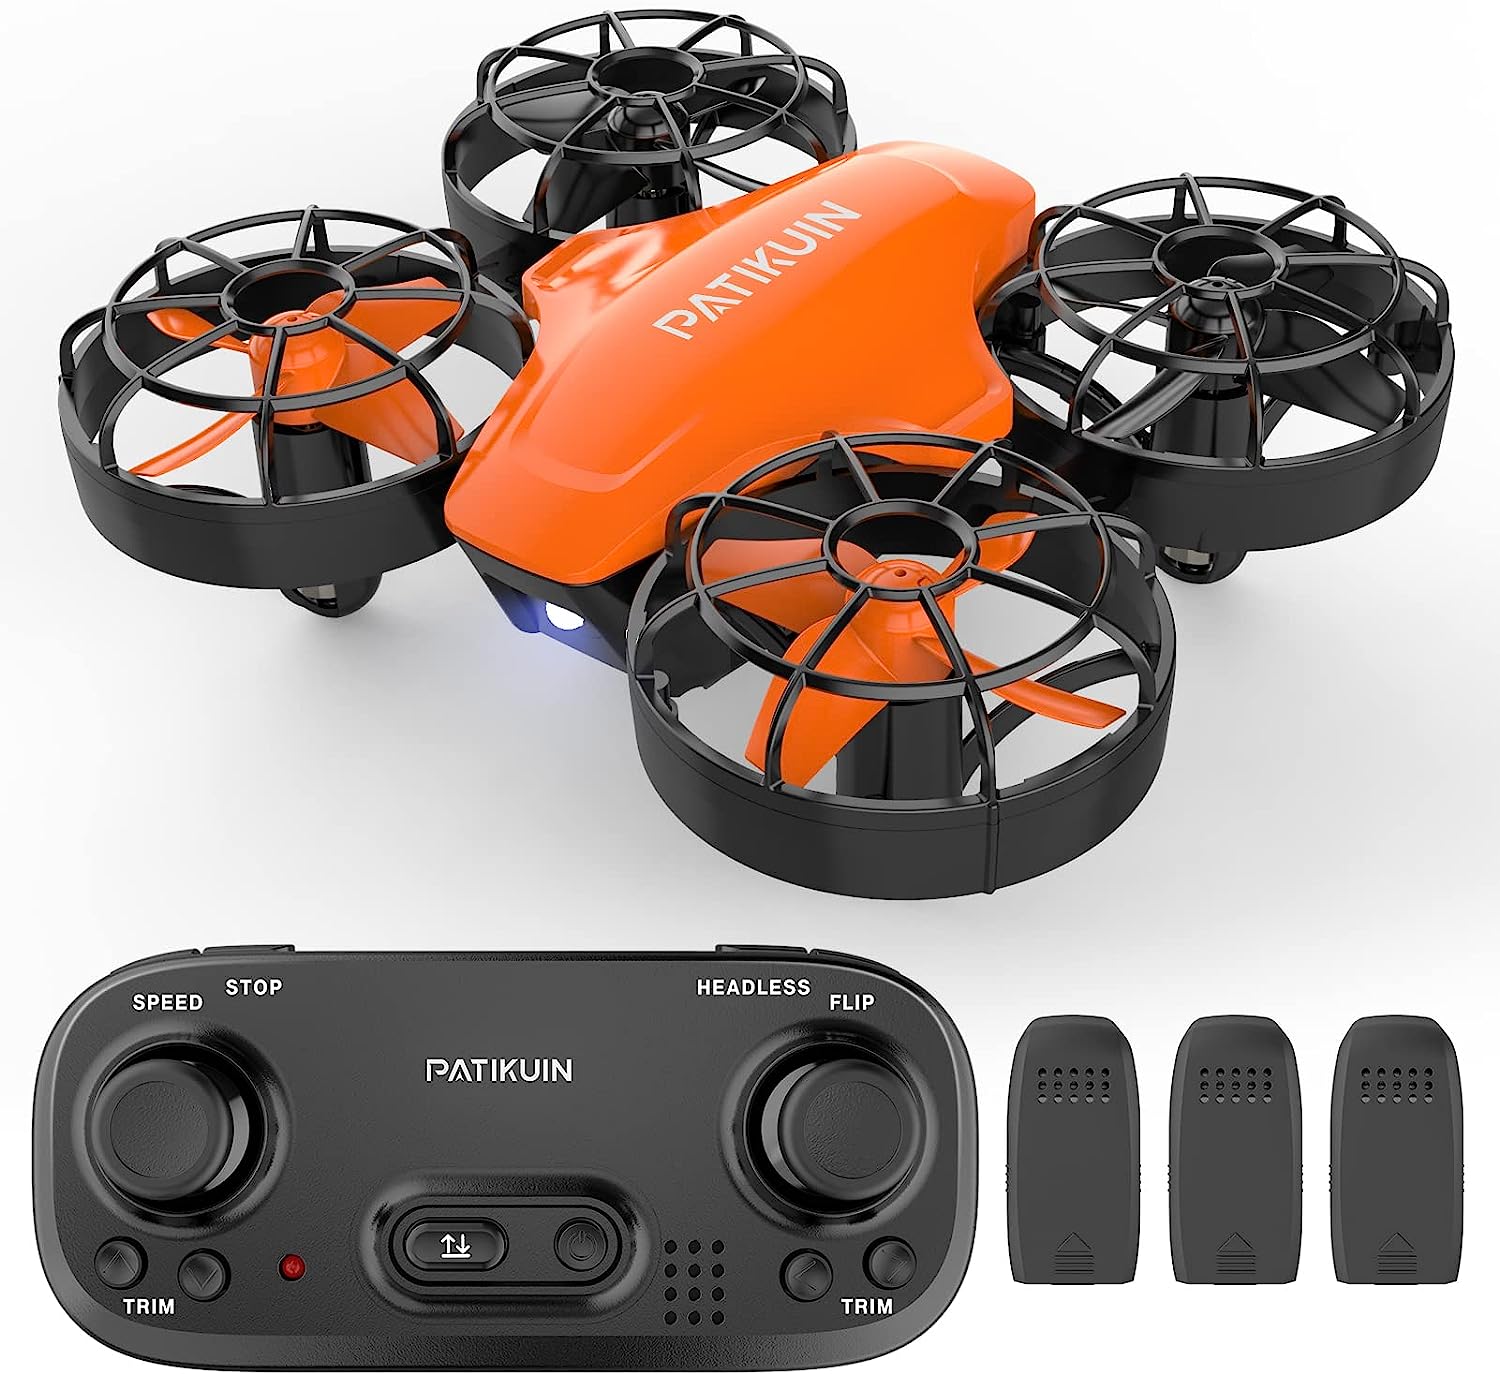 Mini Drones for Kids,PATIKUIN S100 RC Drone with Emergency Stop for over 8 years old Boys and Girls Beginners, Nano RC Helicopter Quadcopter with Auto Hovering 3D Flip Remote Control Headless Mode 3 Batteries Gift Choice for Boys and Girls